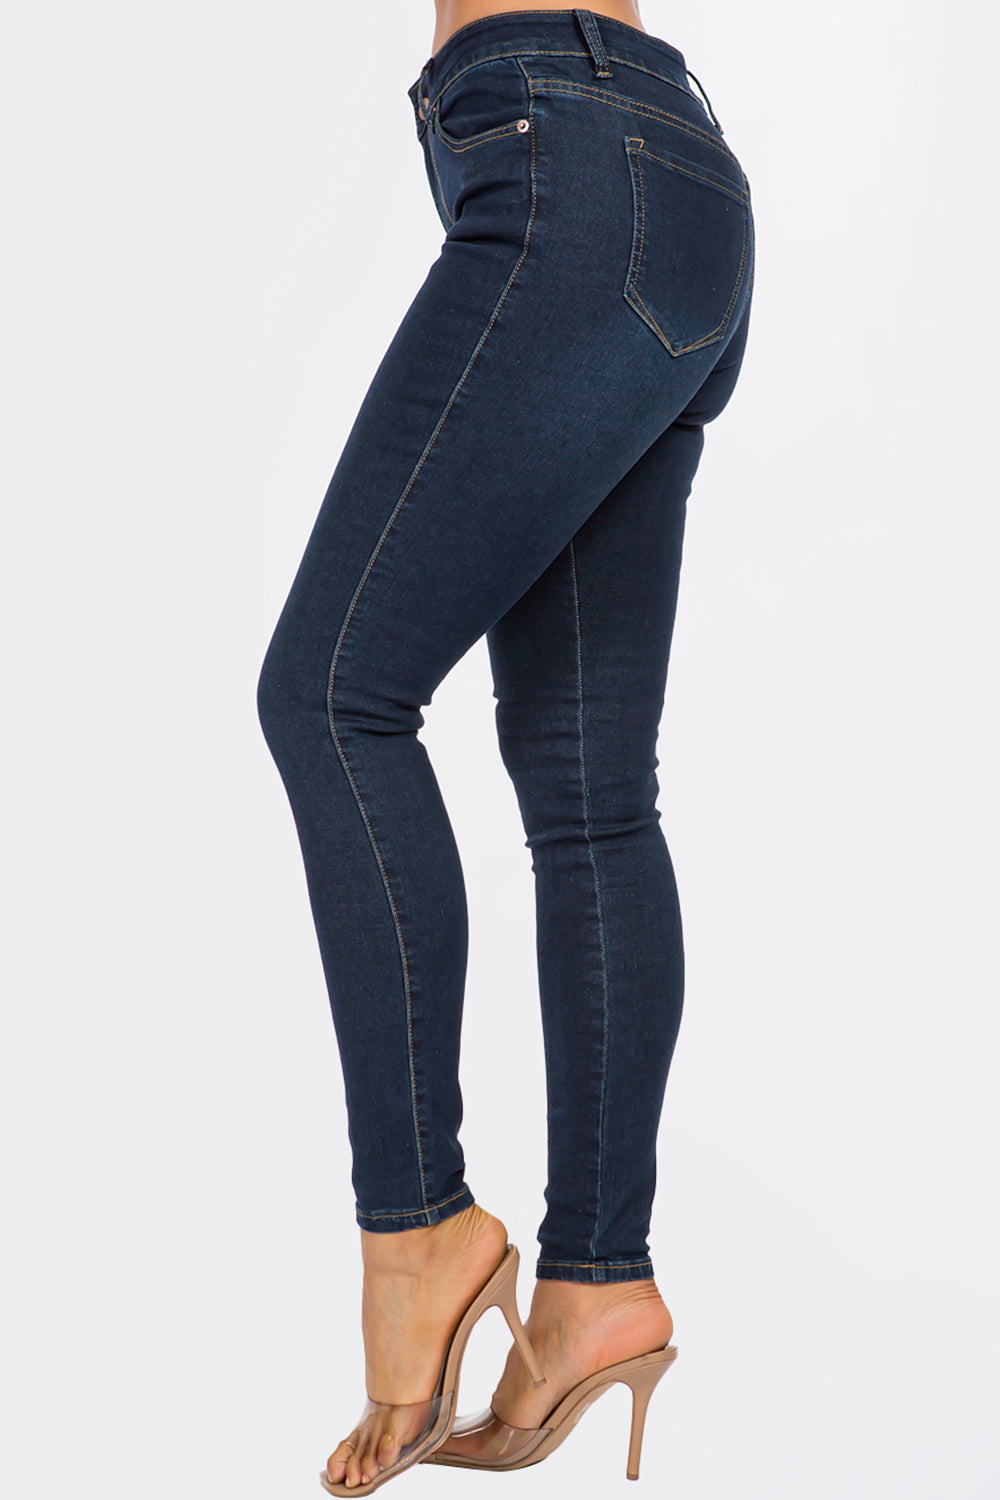 Classic Mid Rise Skinny Jean Extreme Stretch Light WR3702